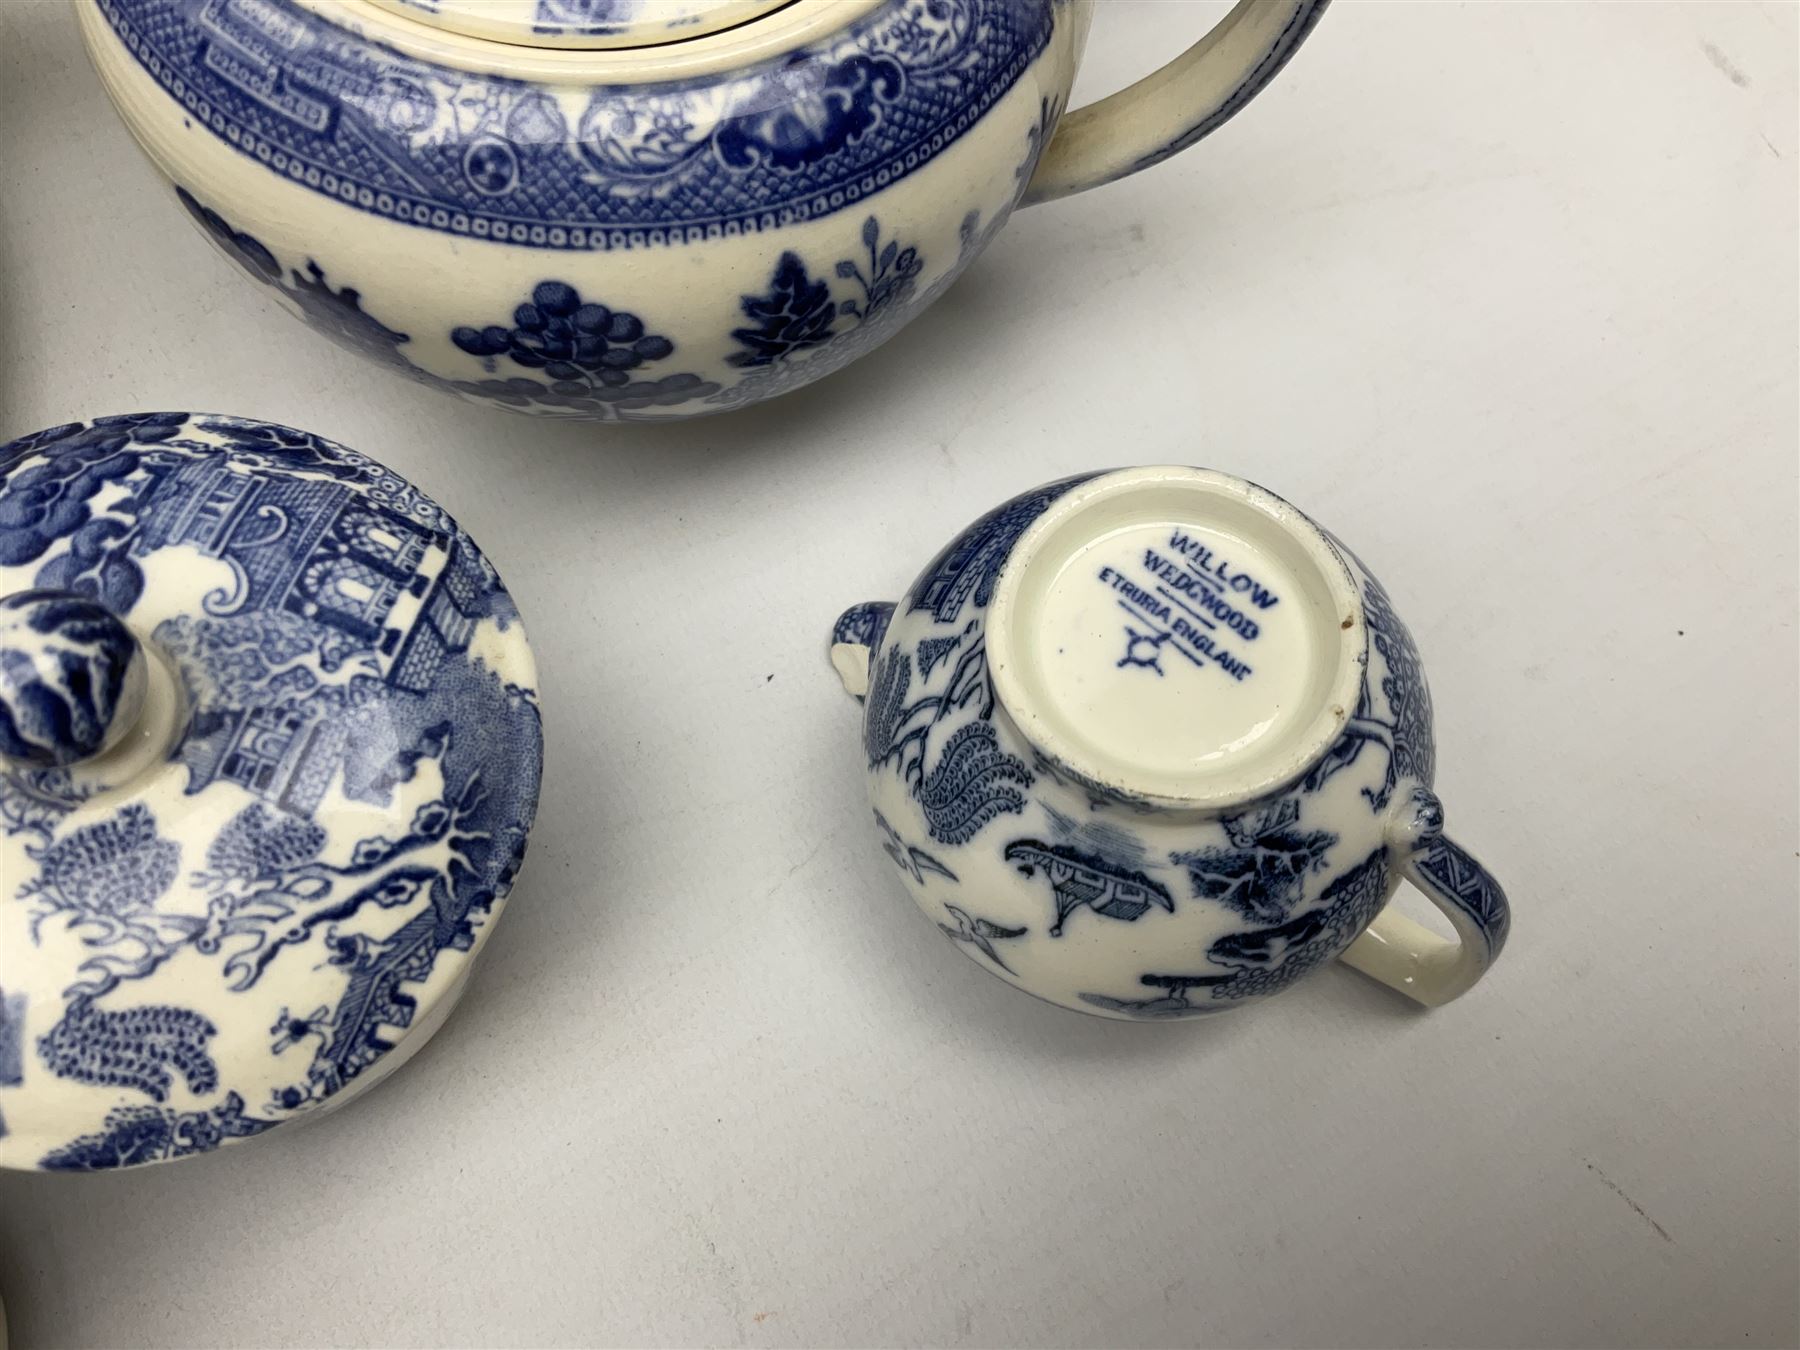 Wedgwood of Etruria blue and white willow patterned tea and dinner wares - Image 2 of 6